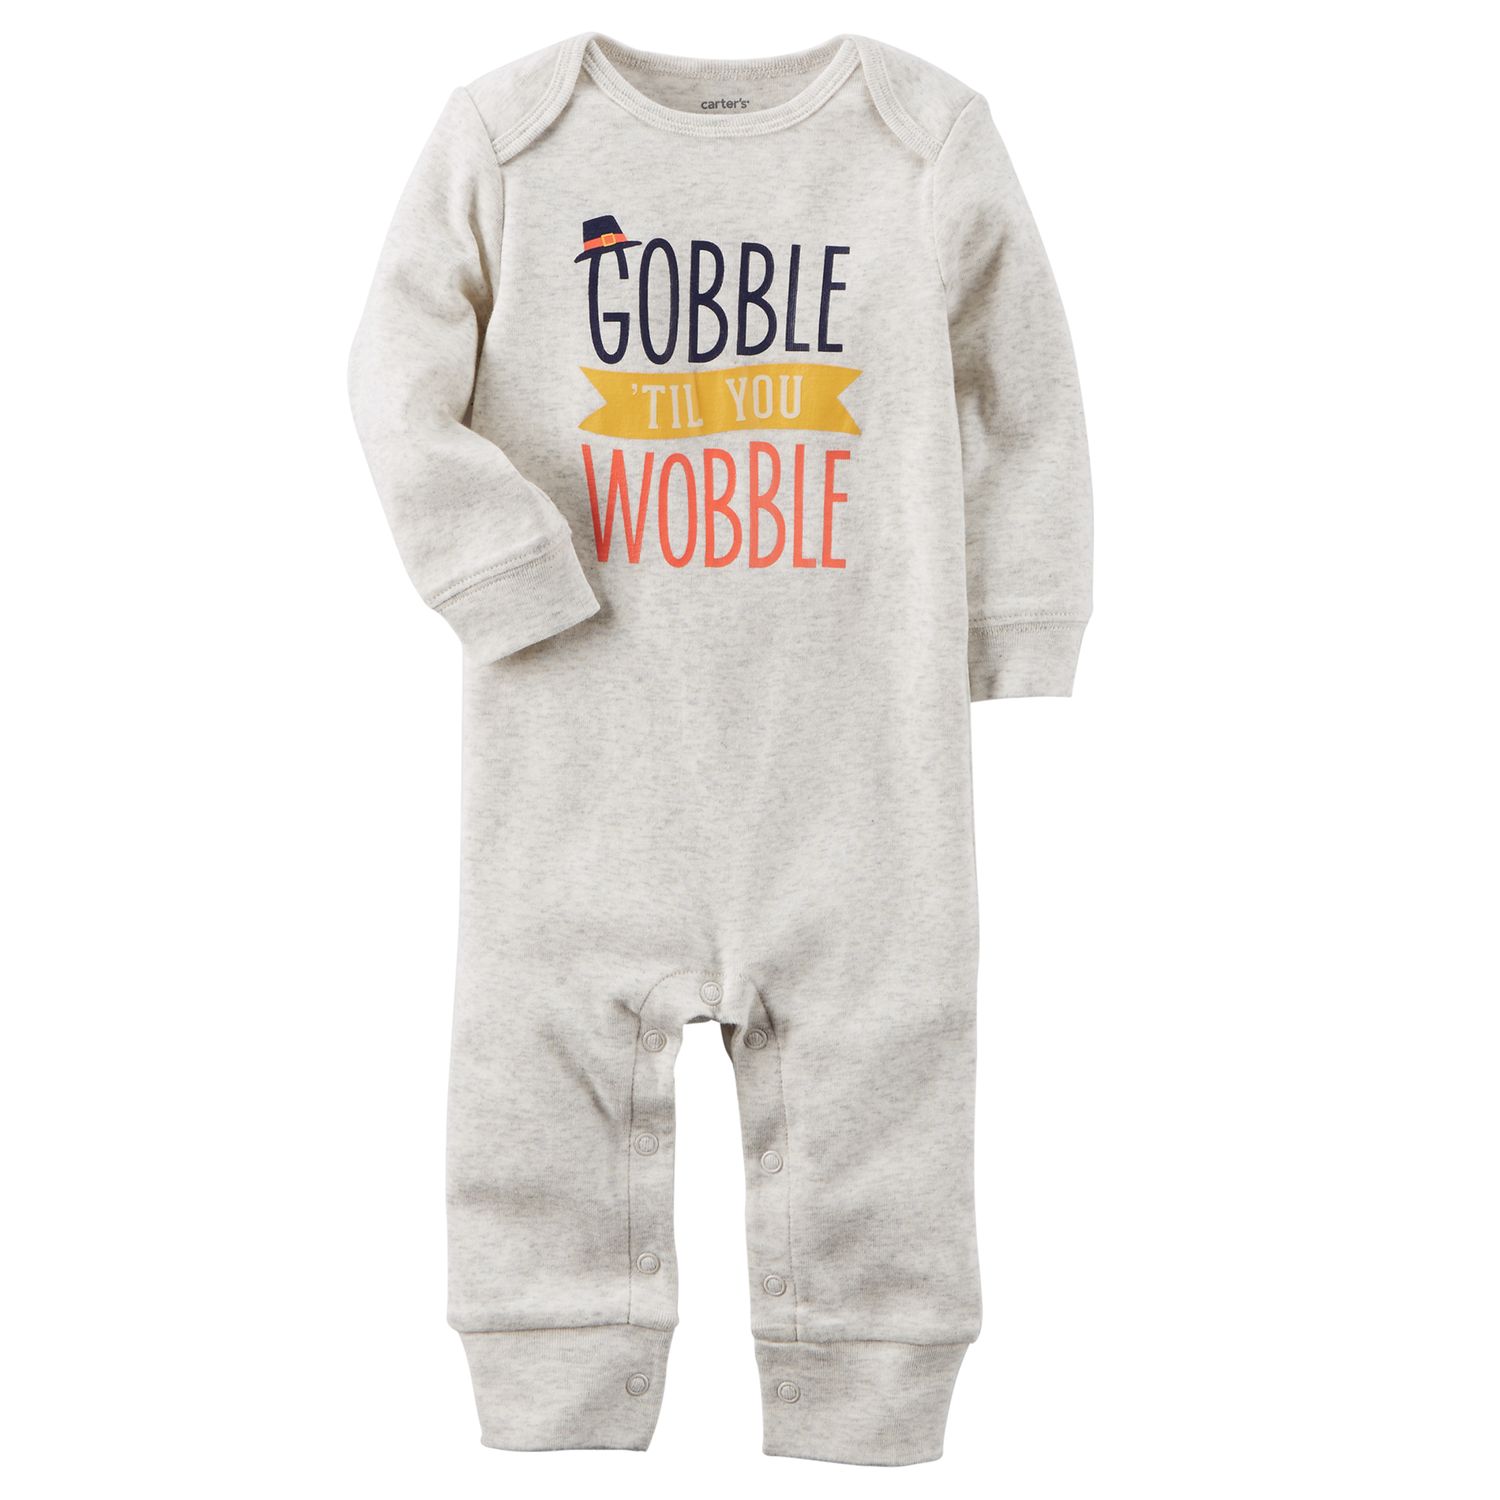 gobble til you wobble baby outfit